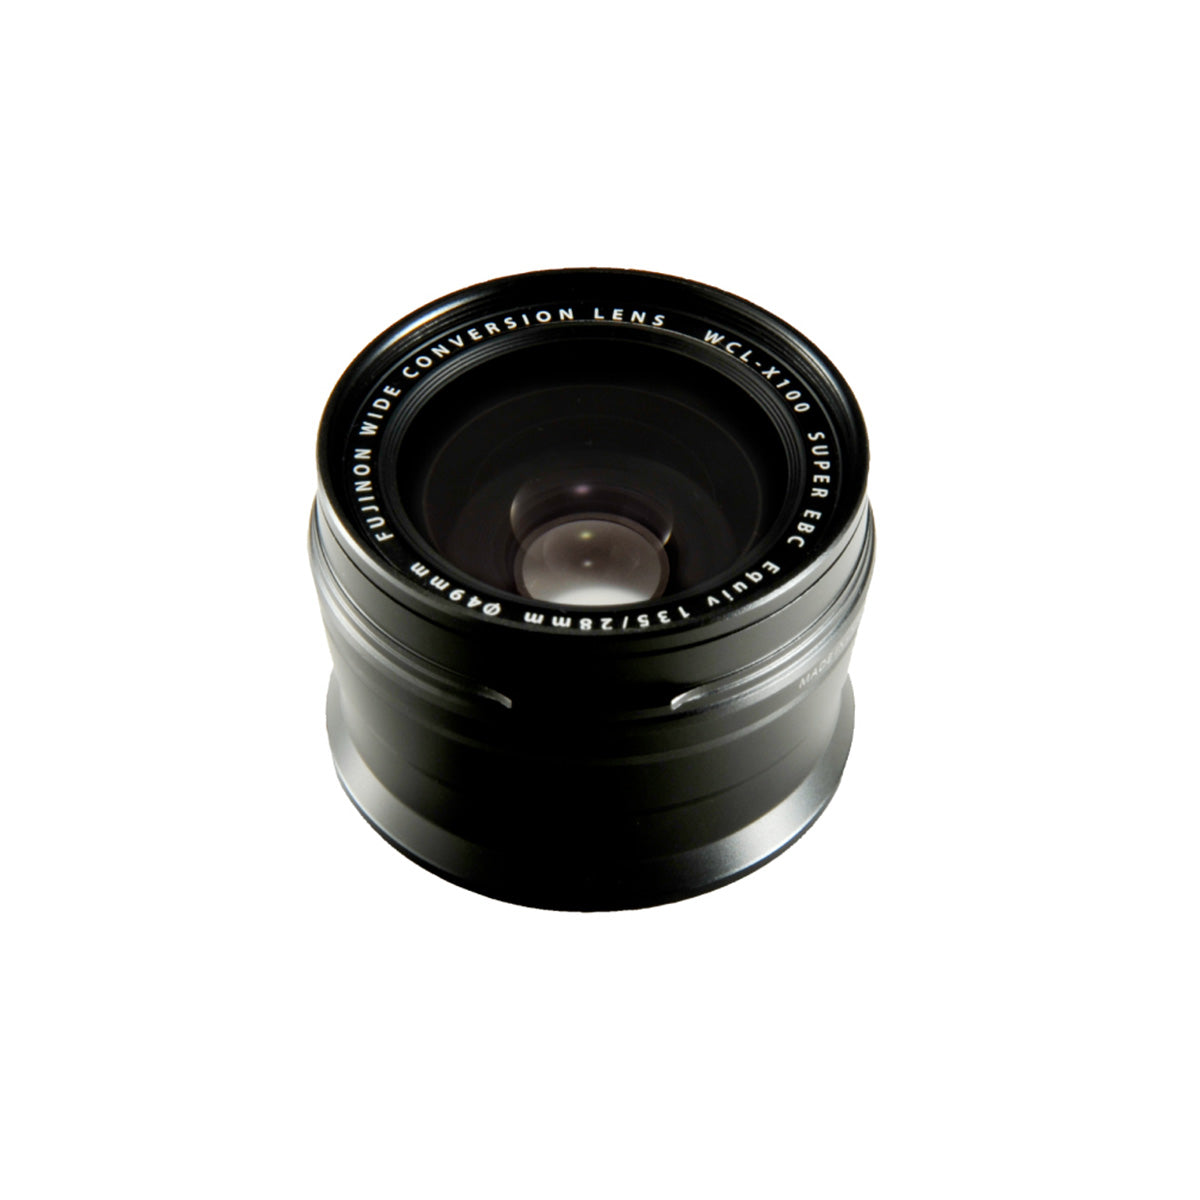 WCL-X100 II Wide Conversion Lens